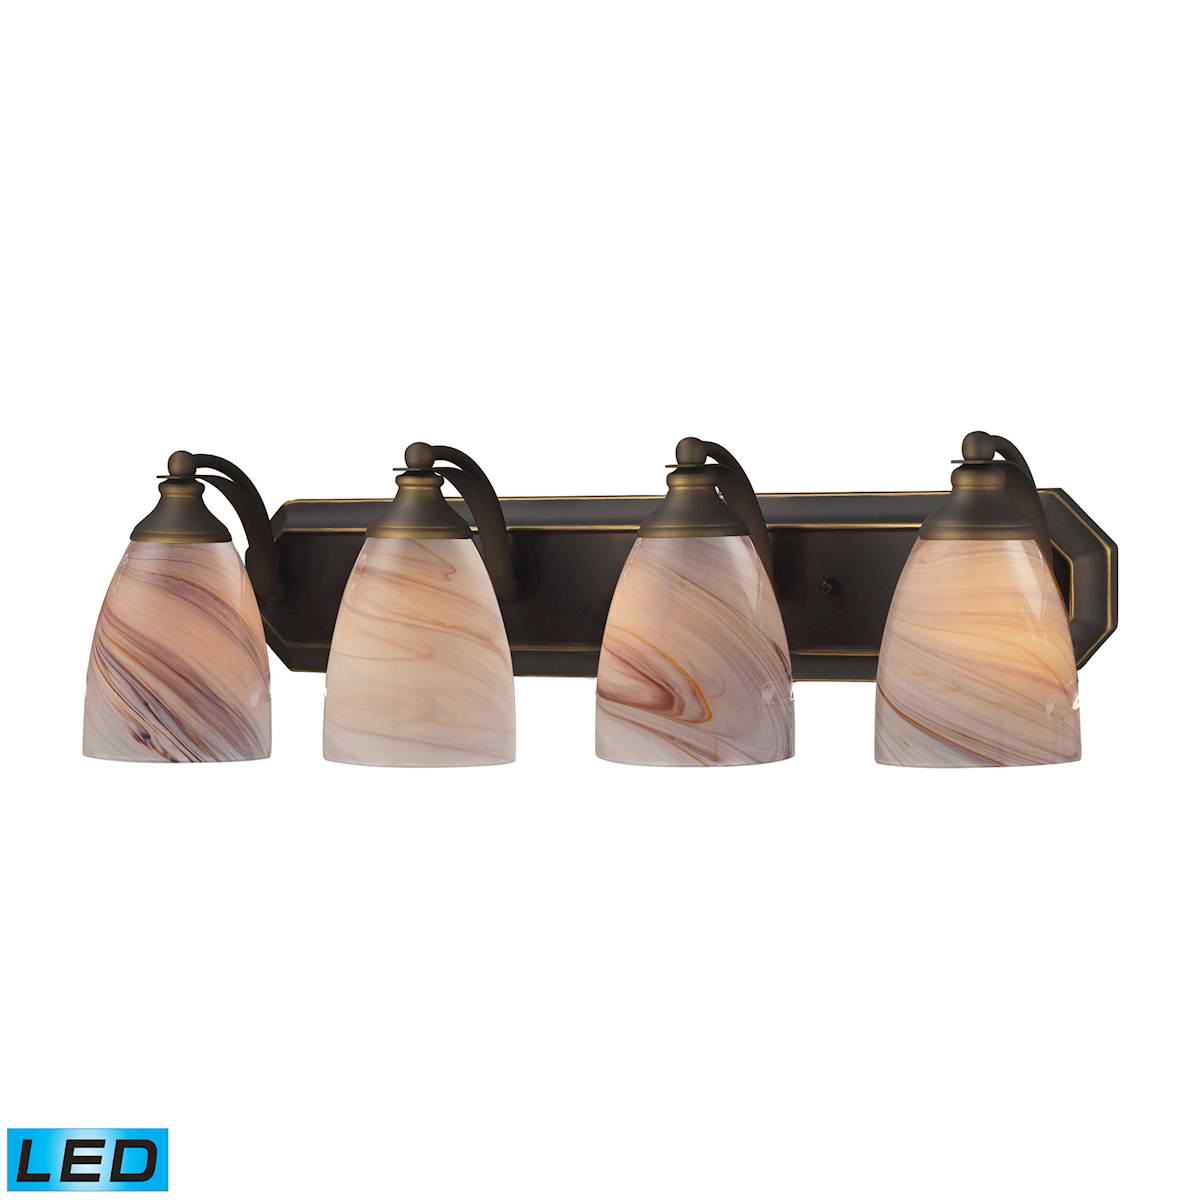 4 Light Vanity in Aged Bronze and Creme Glass - LED, 800 Lumens (3200 Lumens Total) with Full Scale